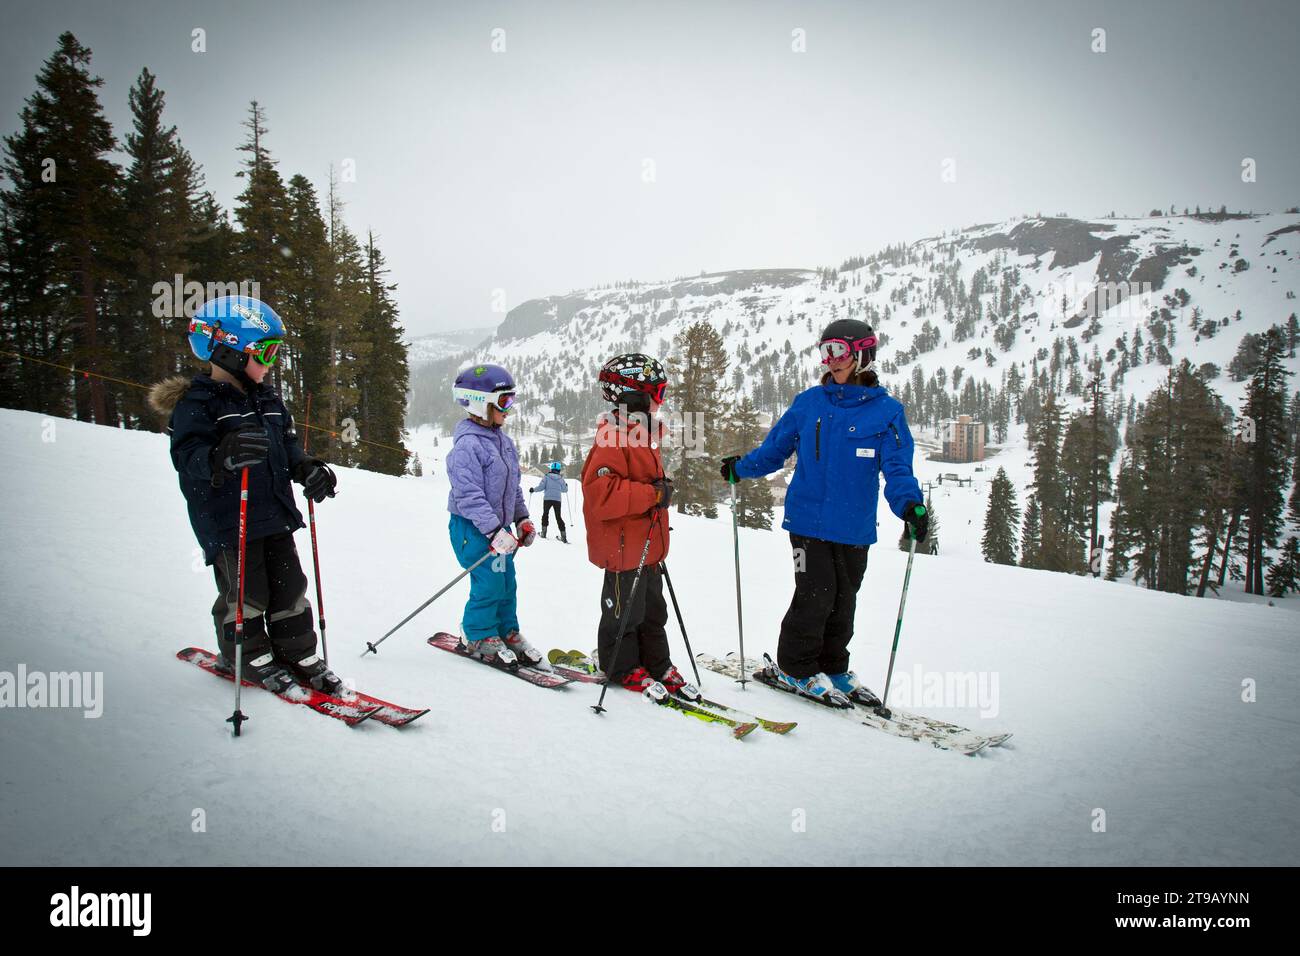 Ski instructor with three young students on a slope at a ski resort. Stock Photo